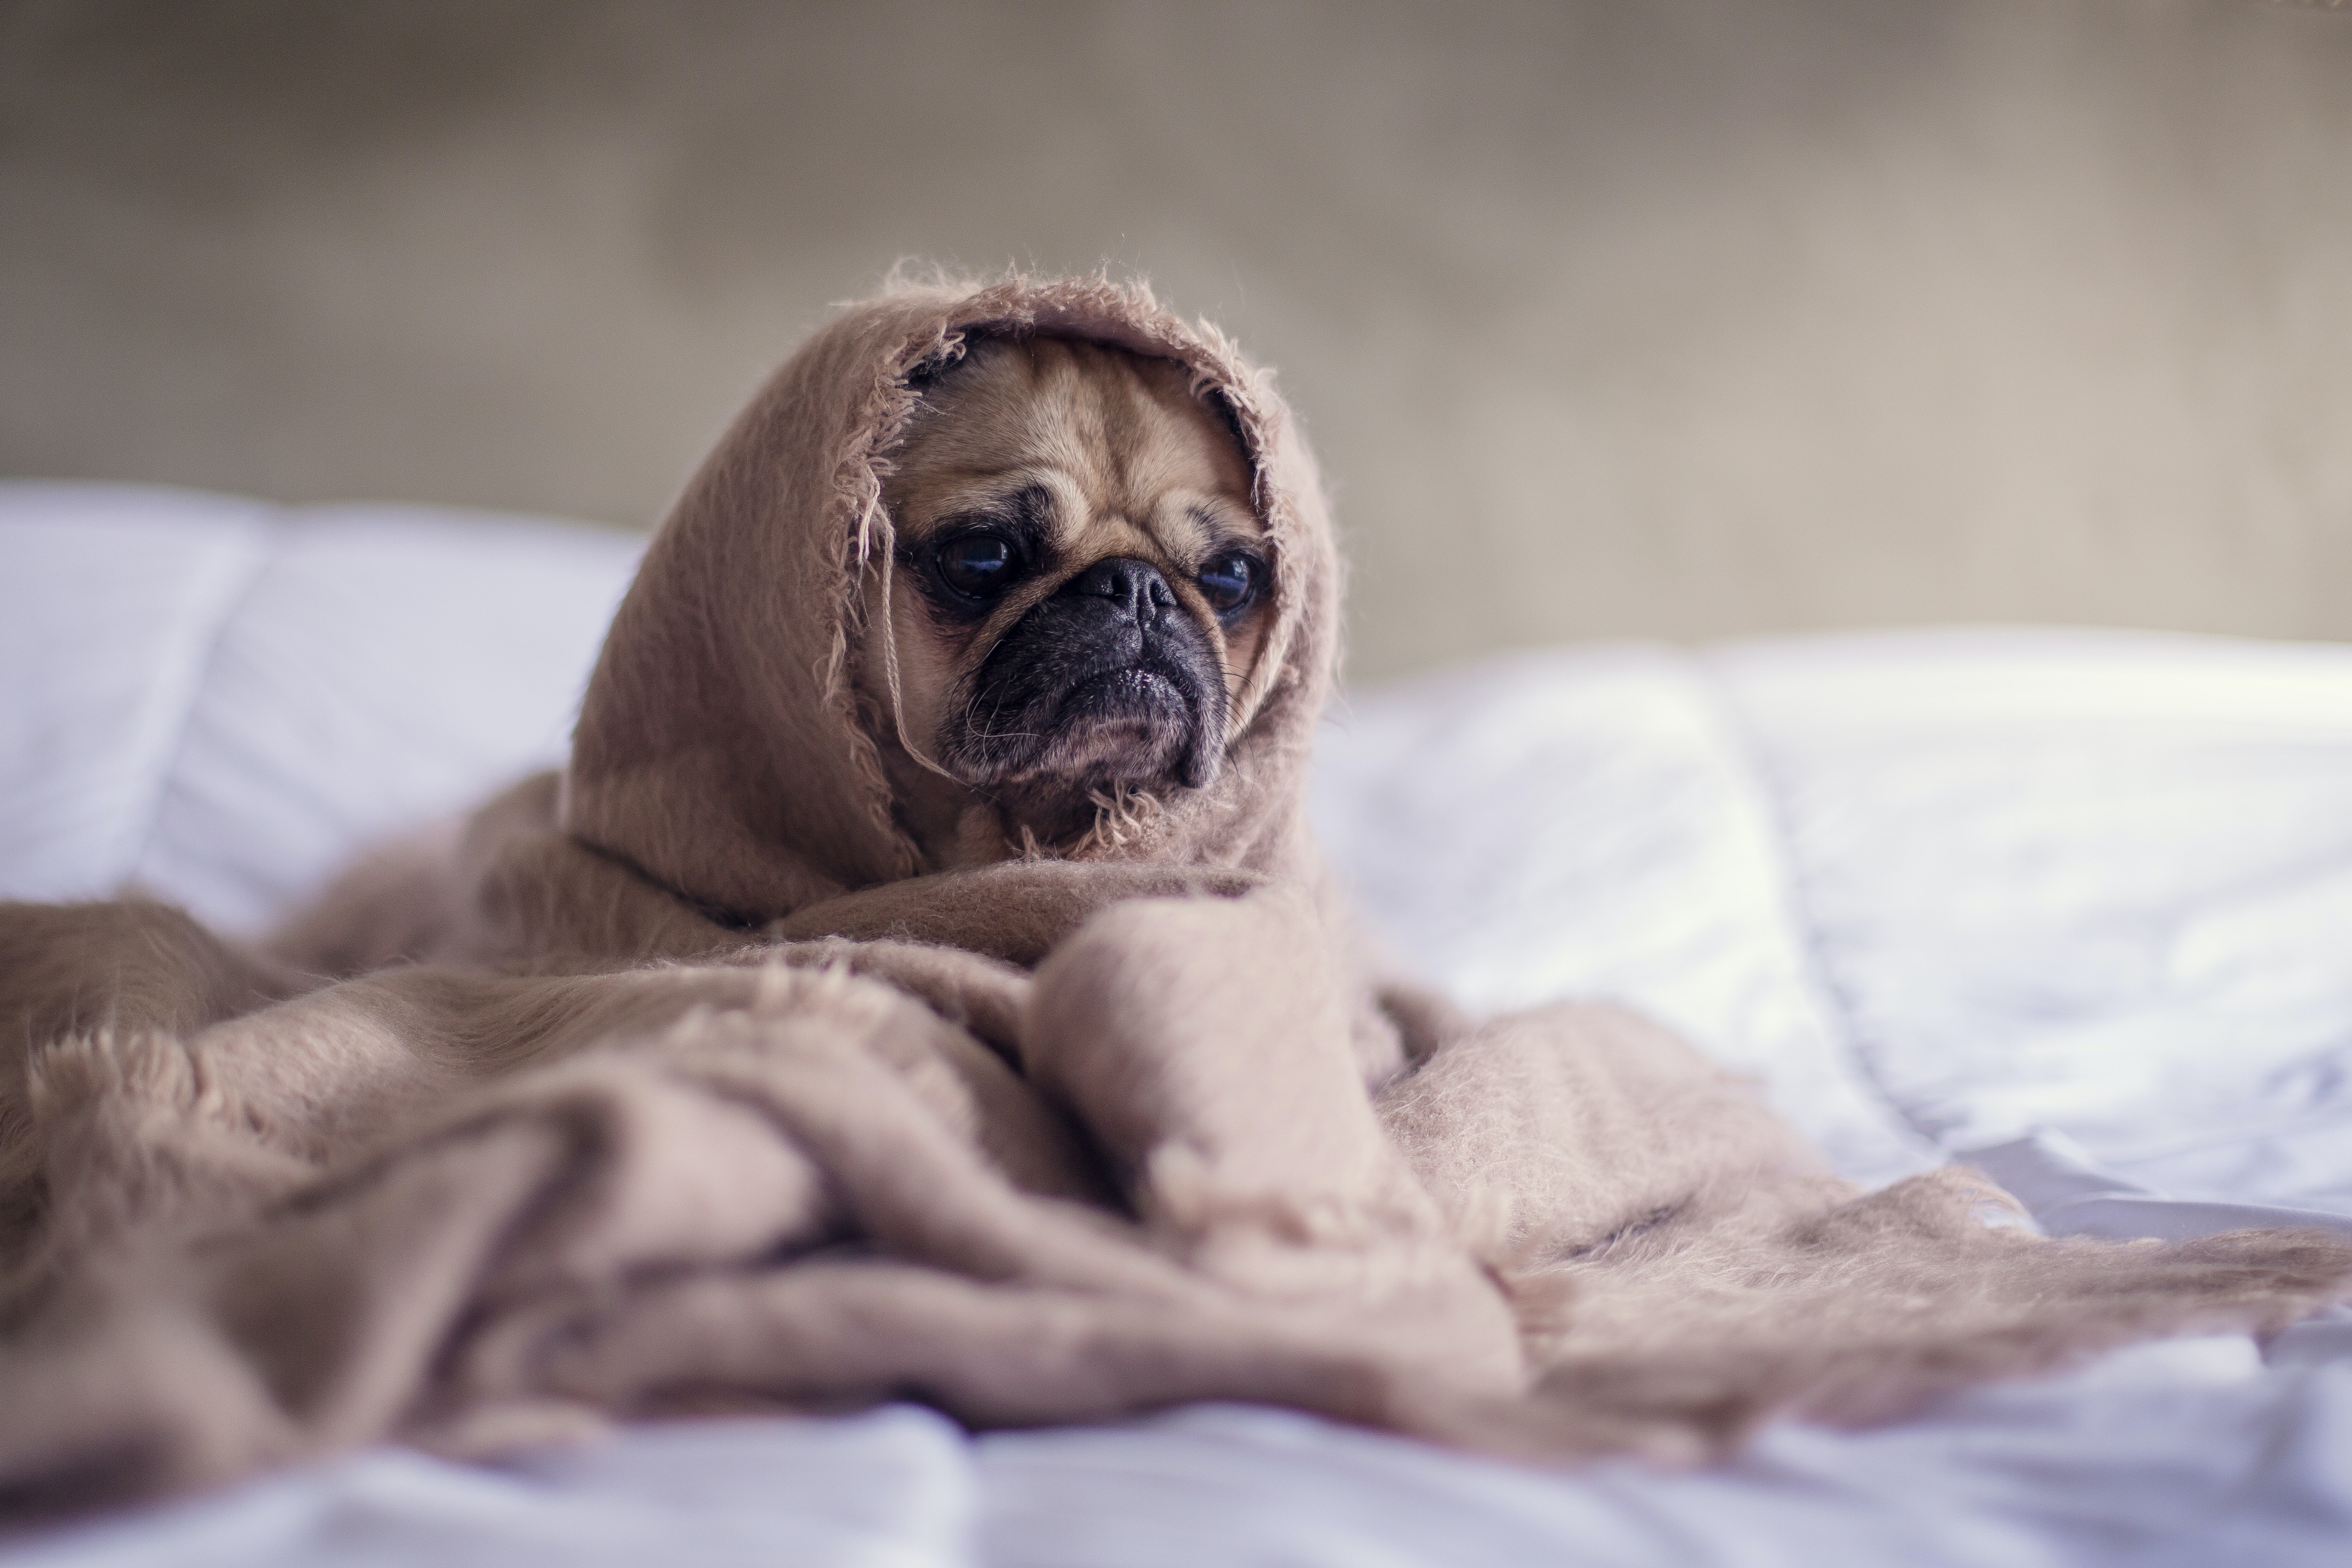 Sad looking cute pug wrapped in a blanket on a bed